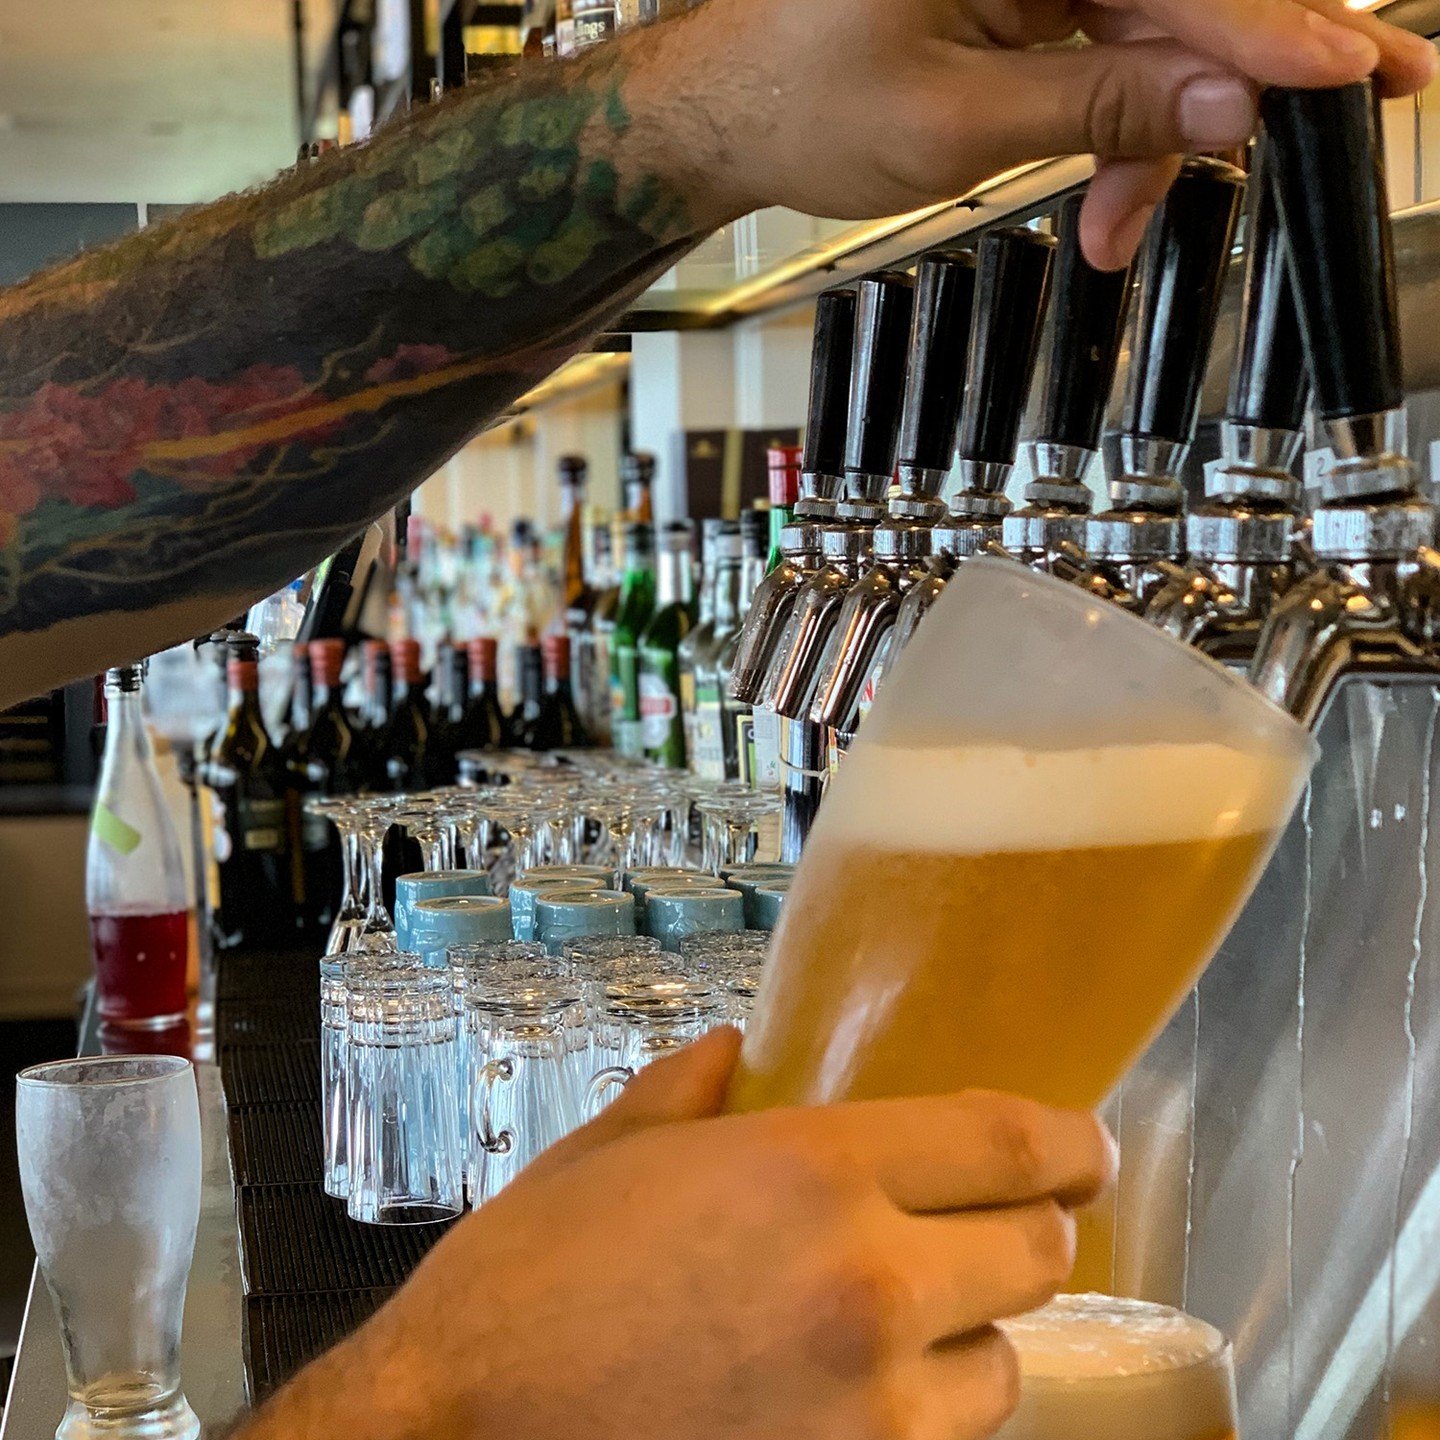 🍺 Come in for a fresh, local brew.
See you at Happy Hour. 
Details on our website.